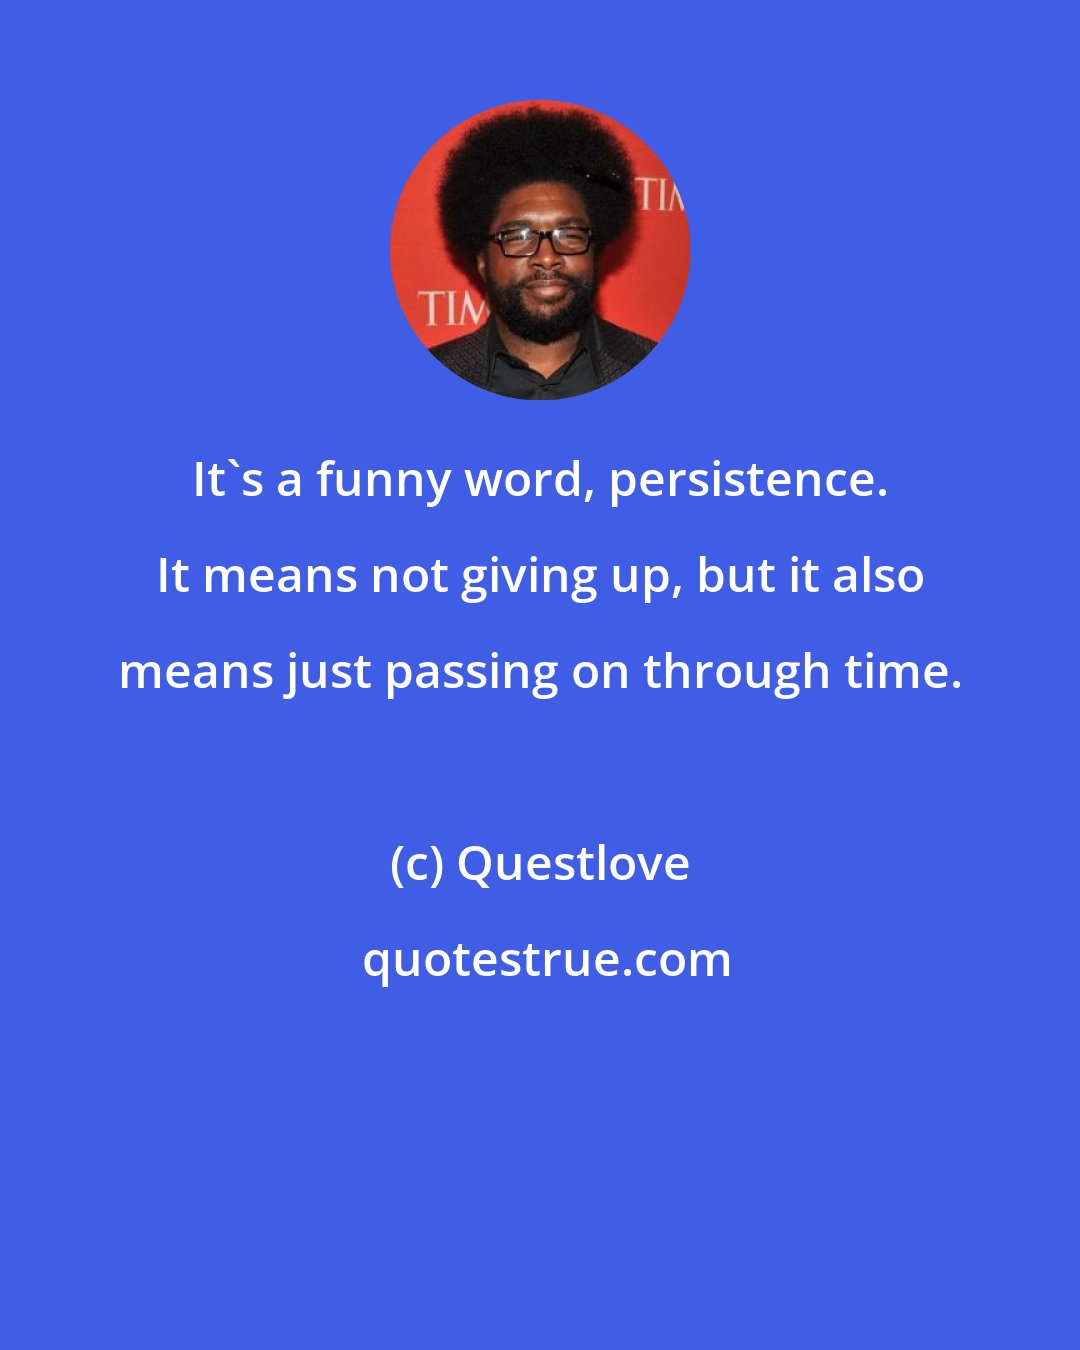 Questlove: It's a funny word, persistence. It means not giving up, but it also means just passing on through time.